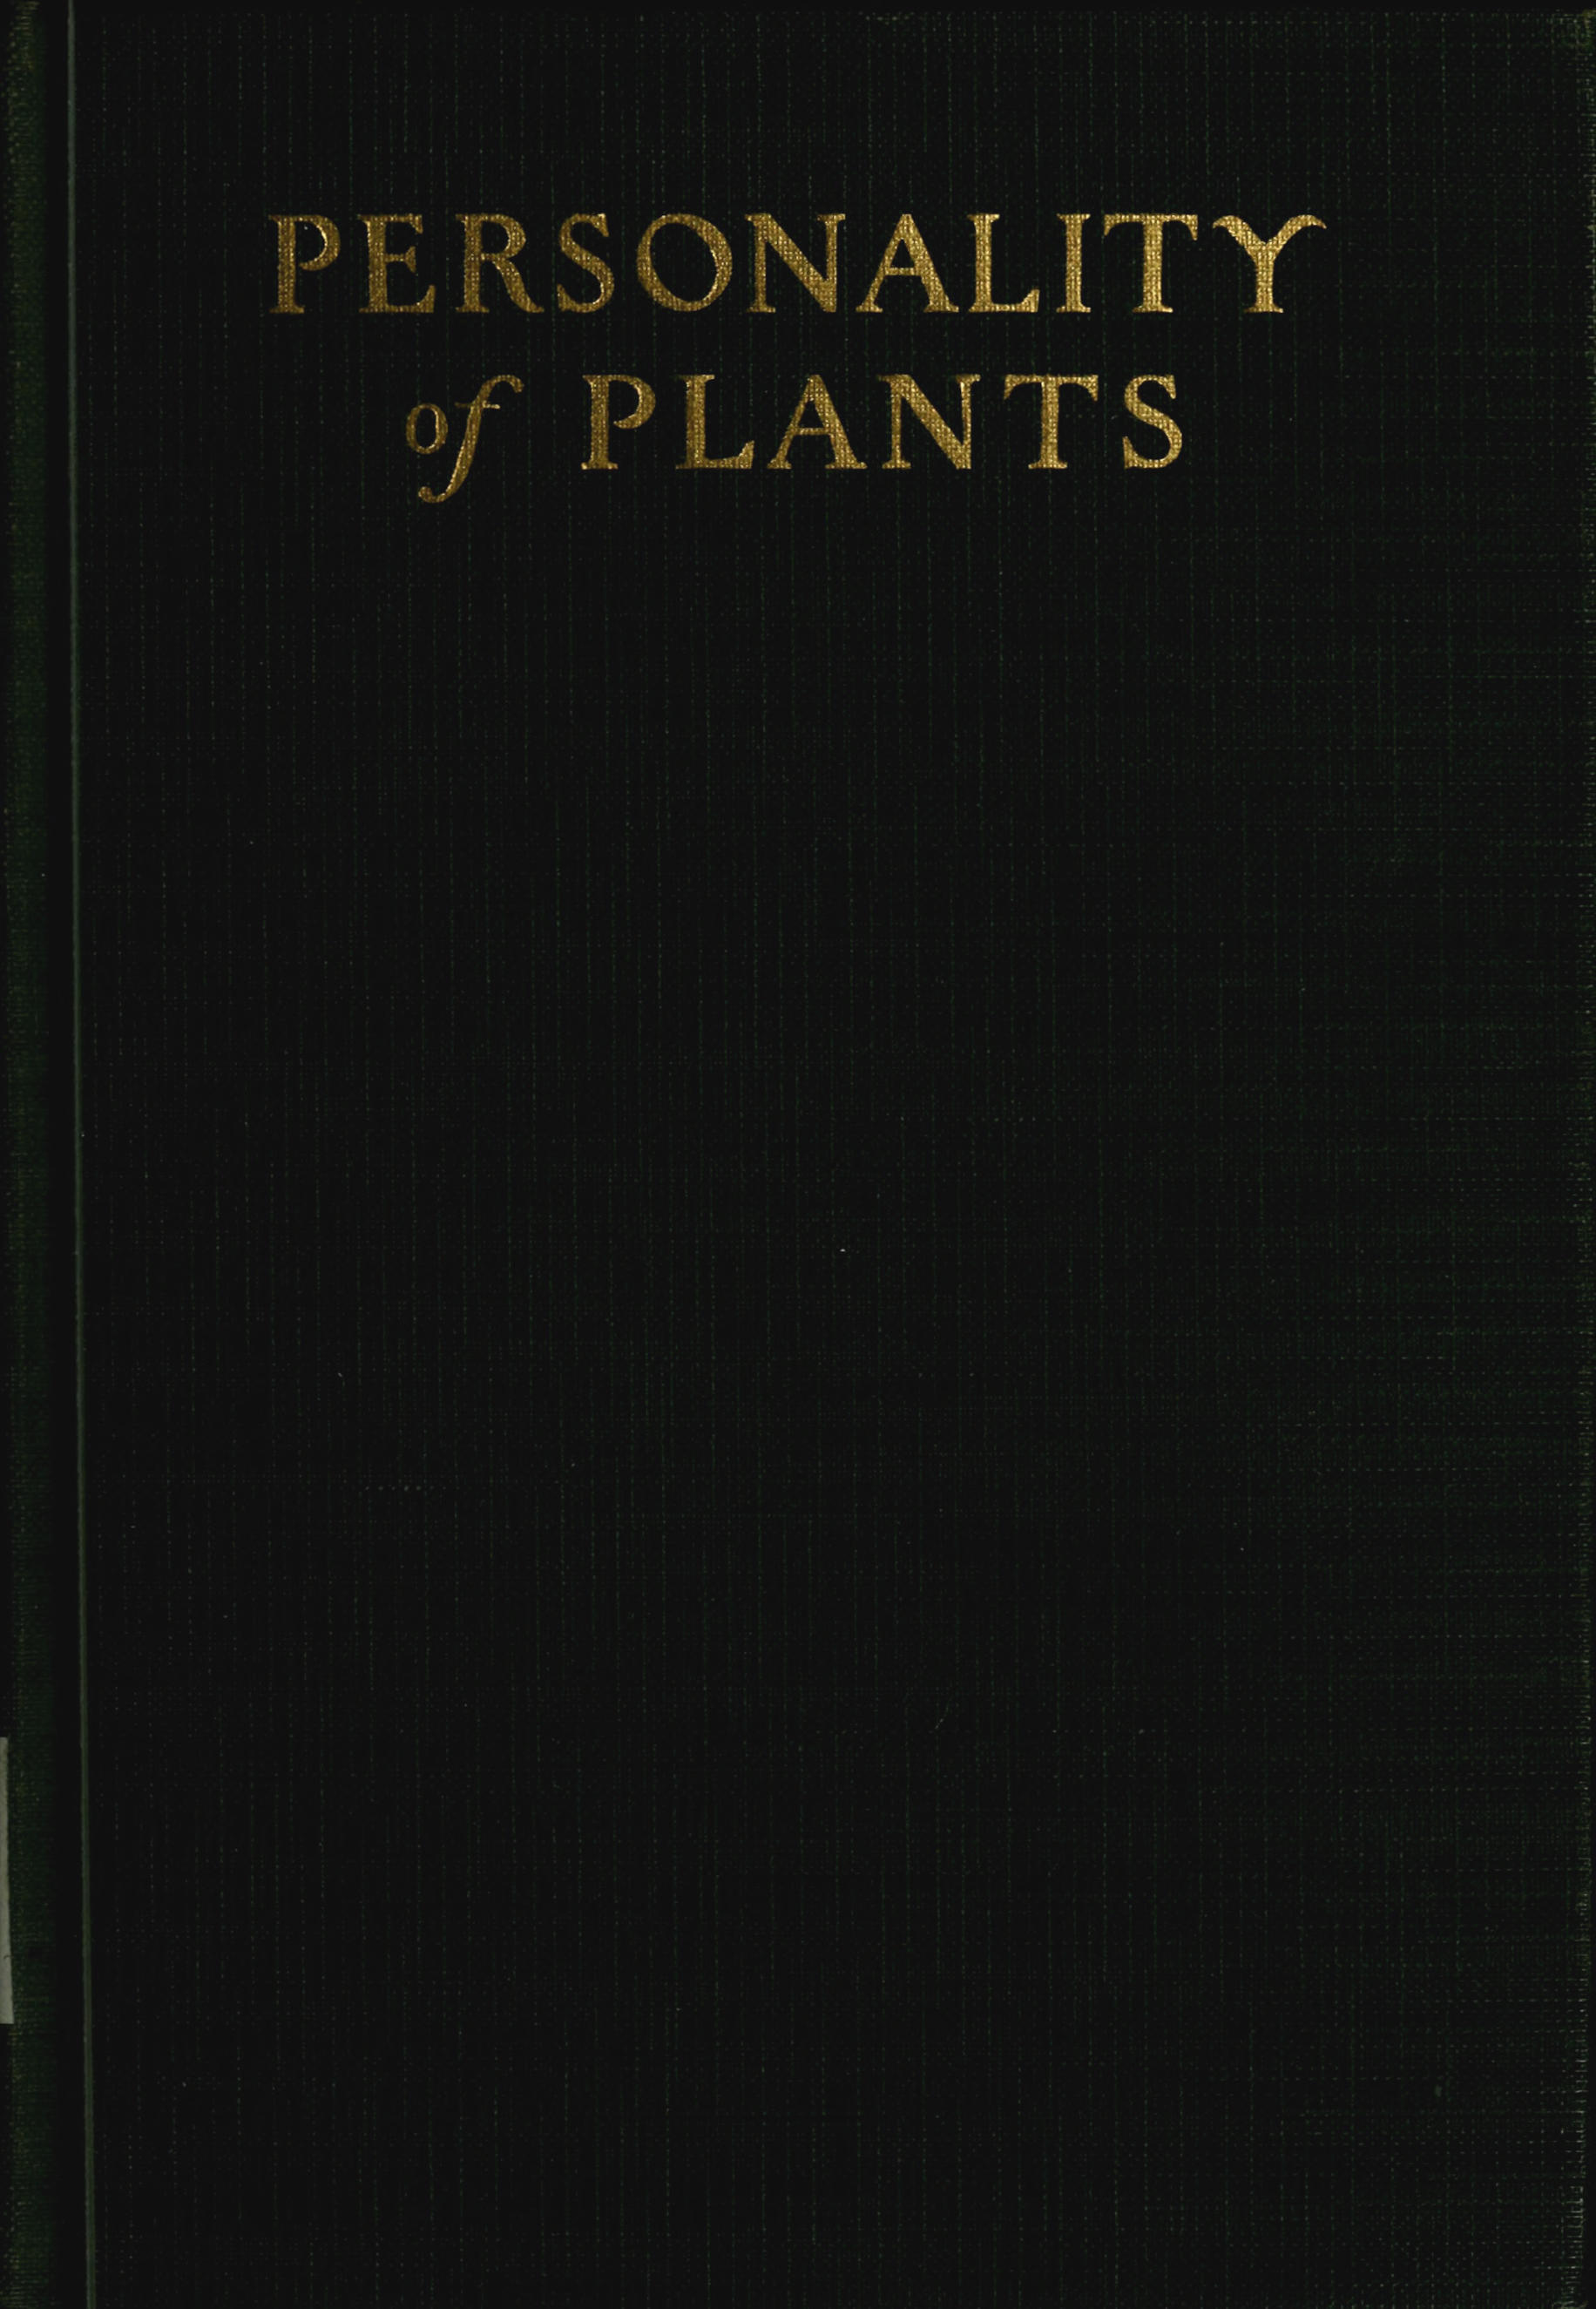 Personality of plants